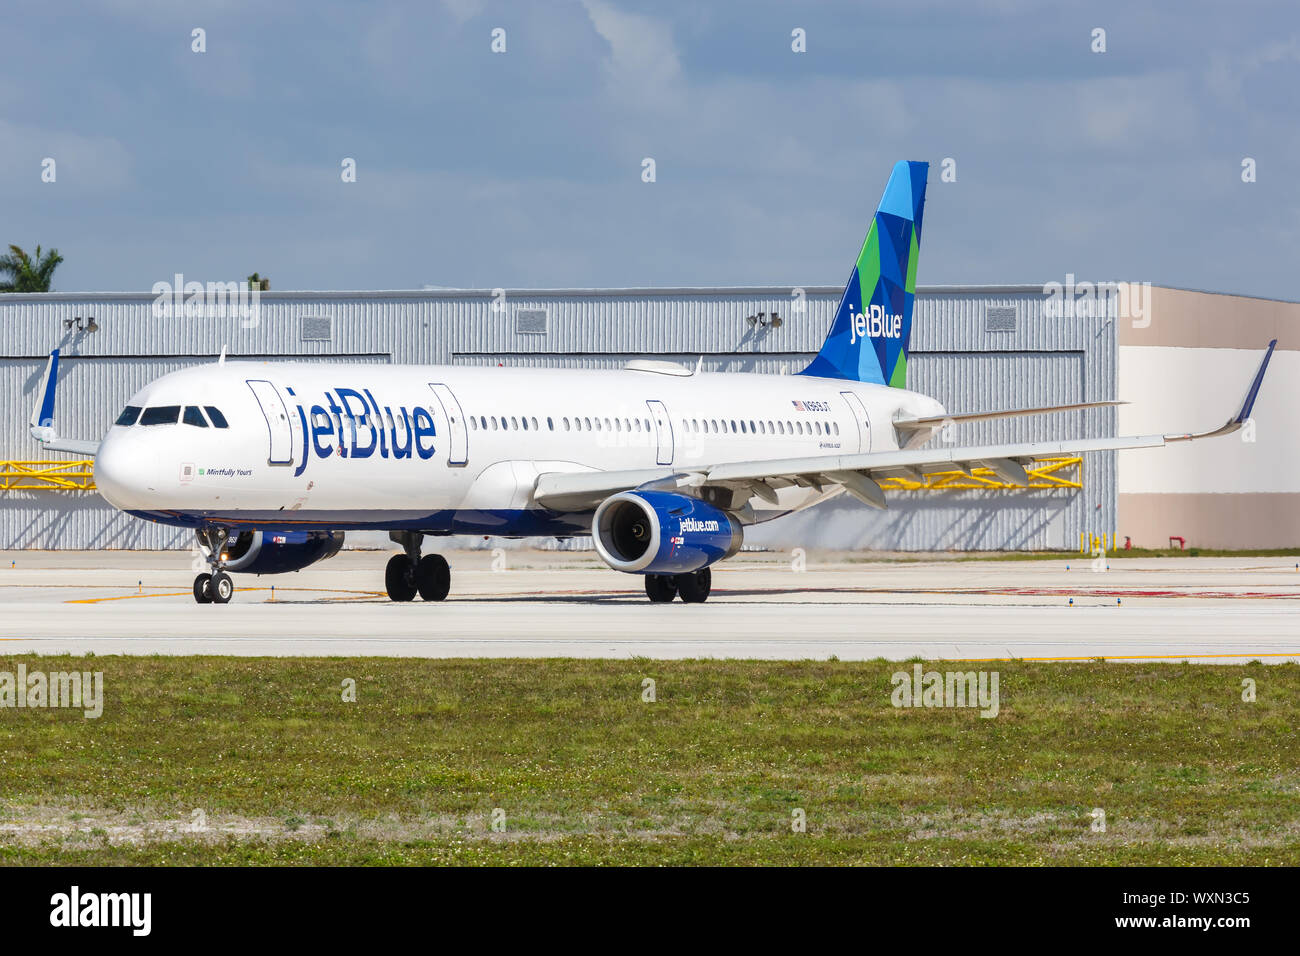 Fort Lauderdale, Florida – April 6, 2019: JetBlue Airbus A321 airplane at Fort Lauderdale airport (FLL) in Florida. Stock Photo